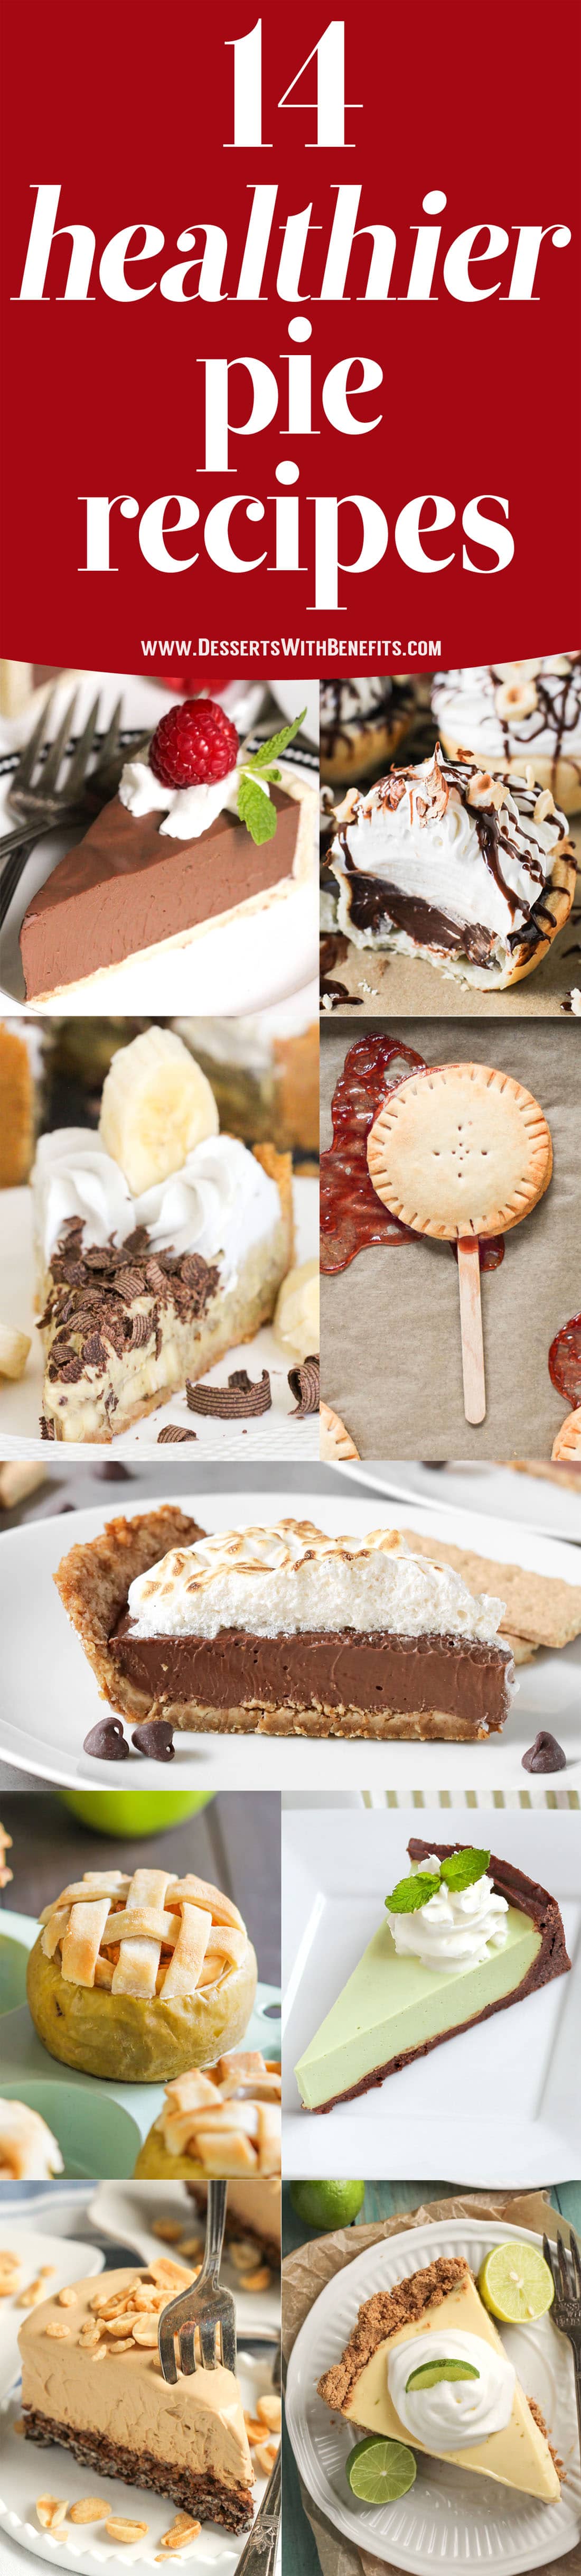 Celebrate Pi Day with Pie! Healthy pie, that is. These 14 healthy pie recipes will satisfy your sweet tooth without all the extra calories, fat, and sugar!